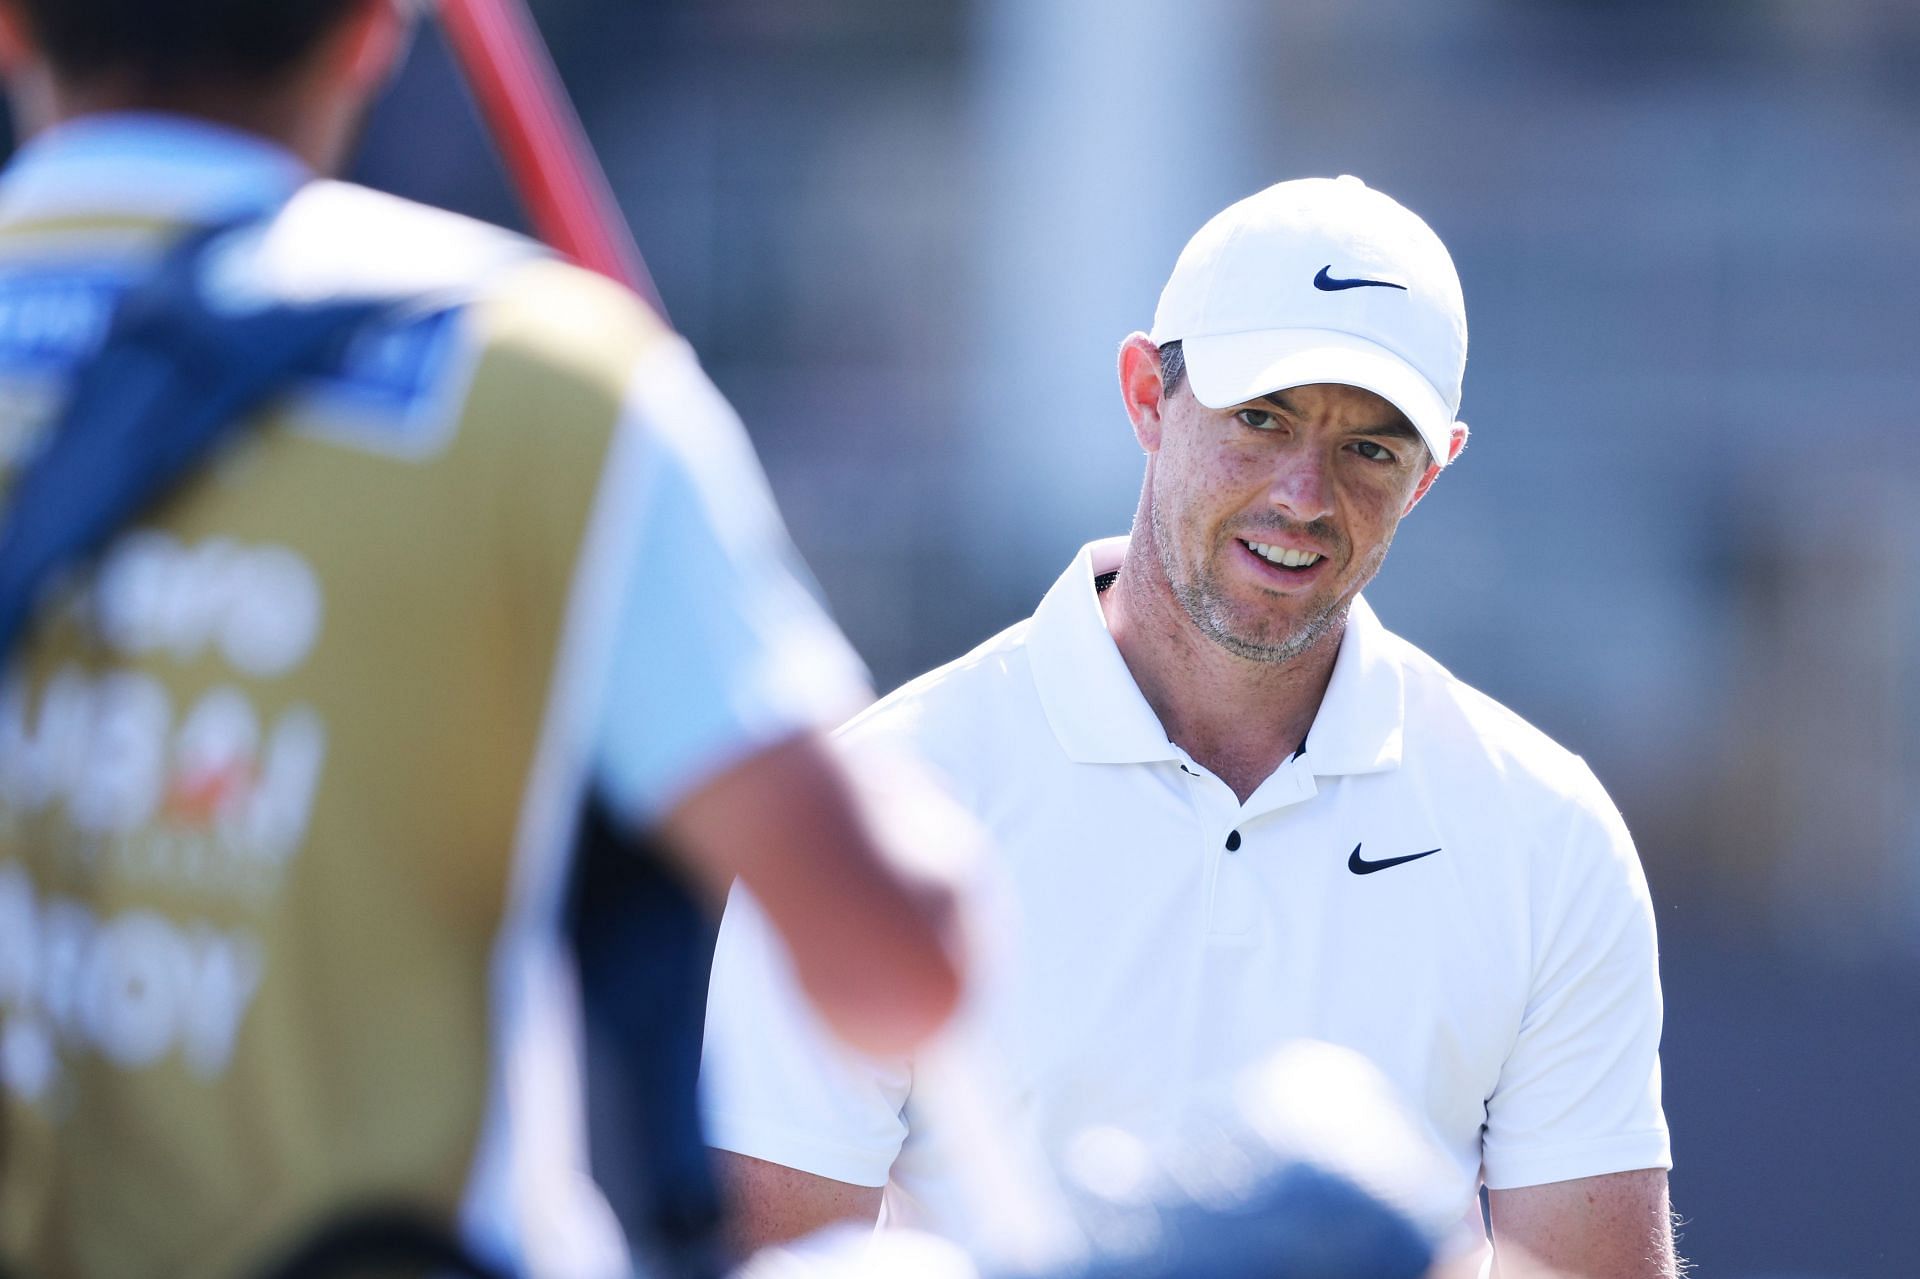 Rory McIlroy struggled at the end